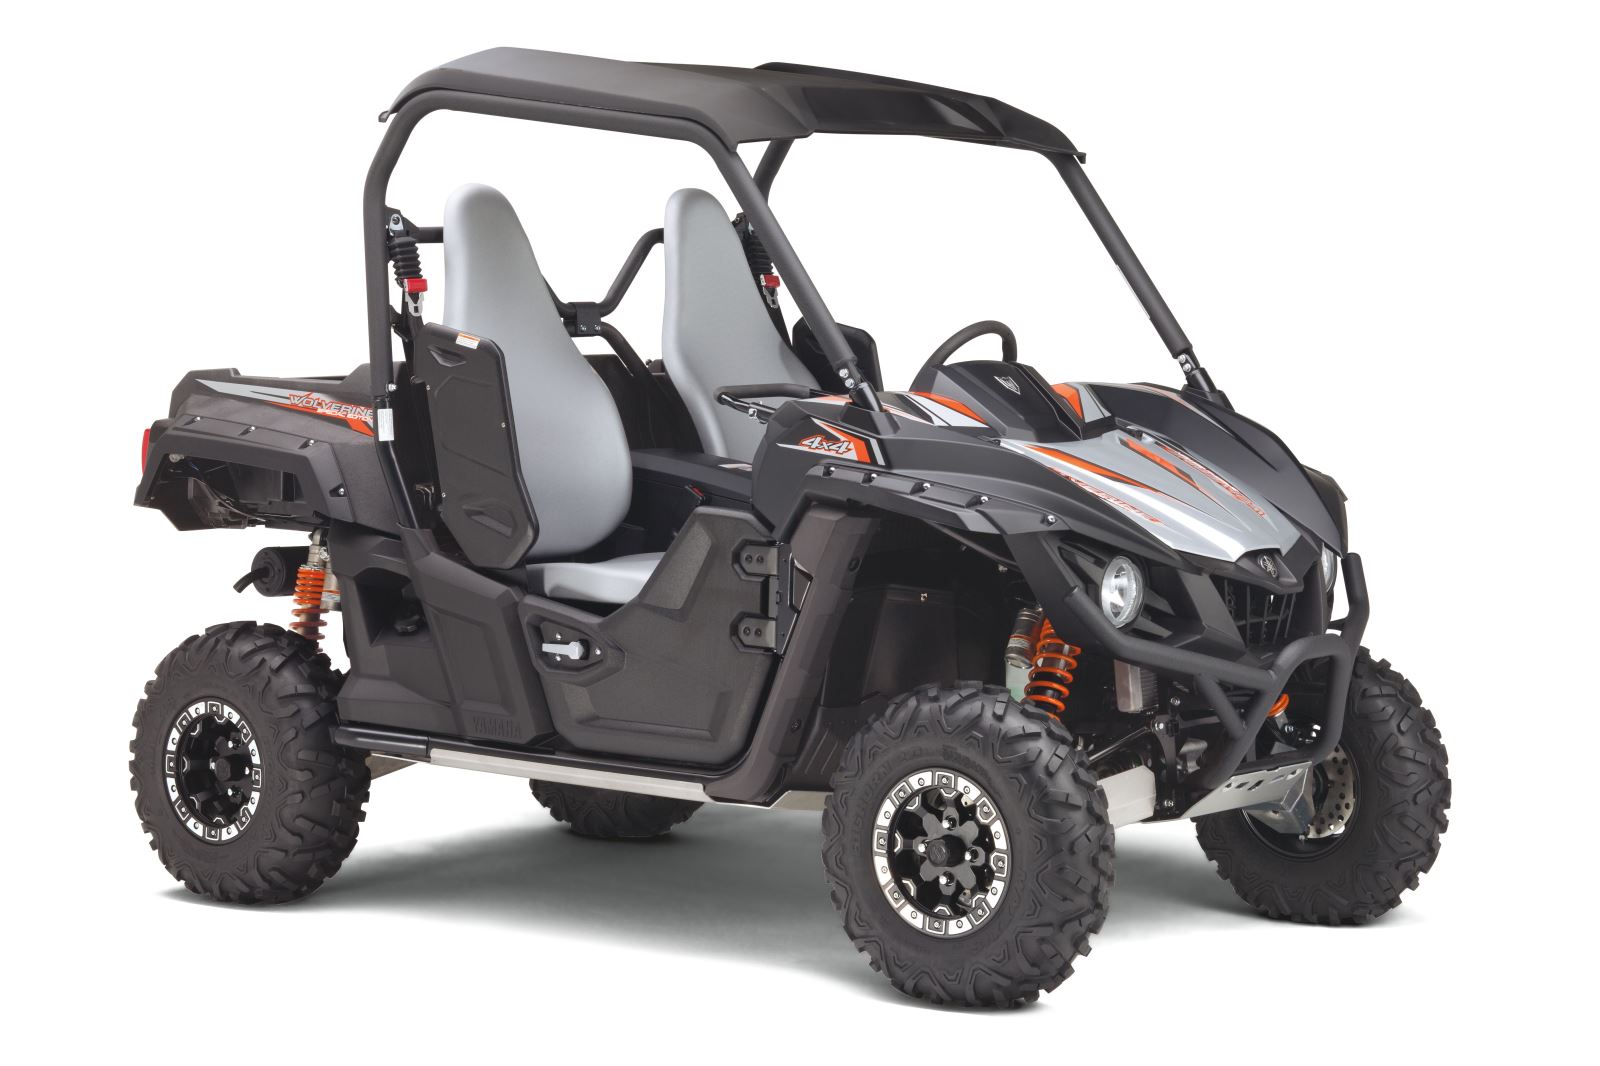 Yamaha Introduces New YXZ1000R, Wolverine SxS Special Edition Models ...